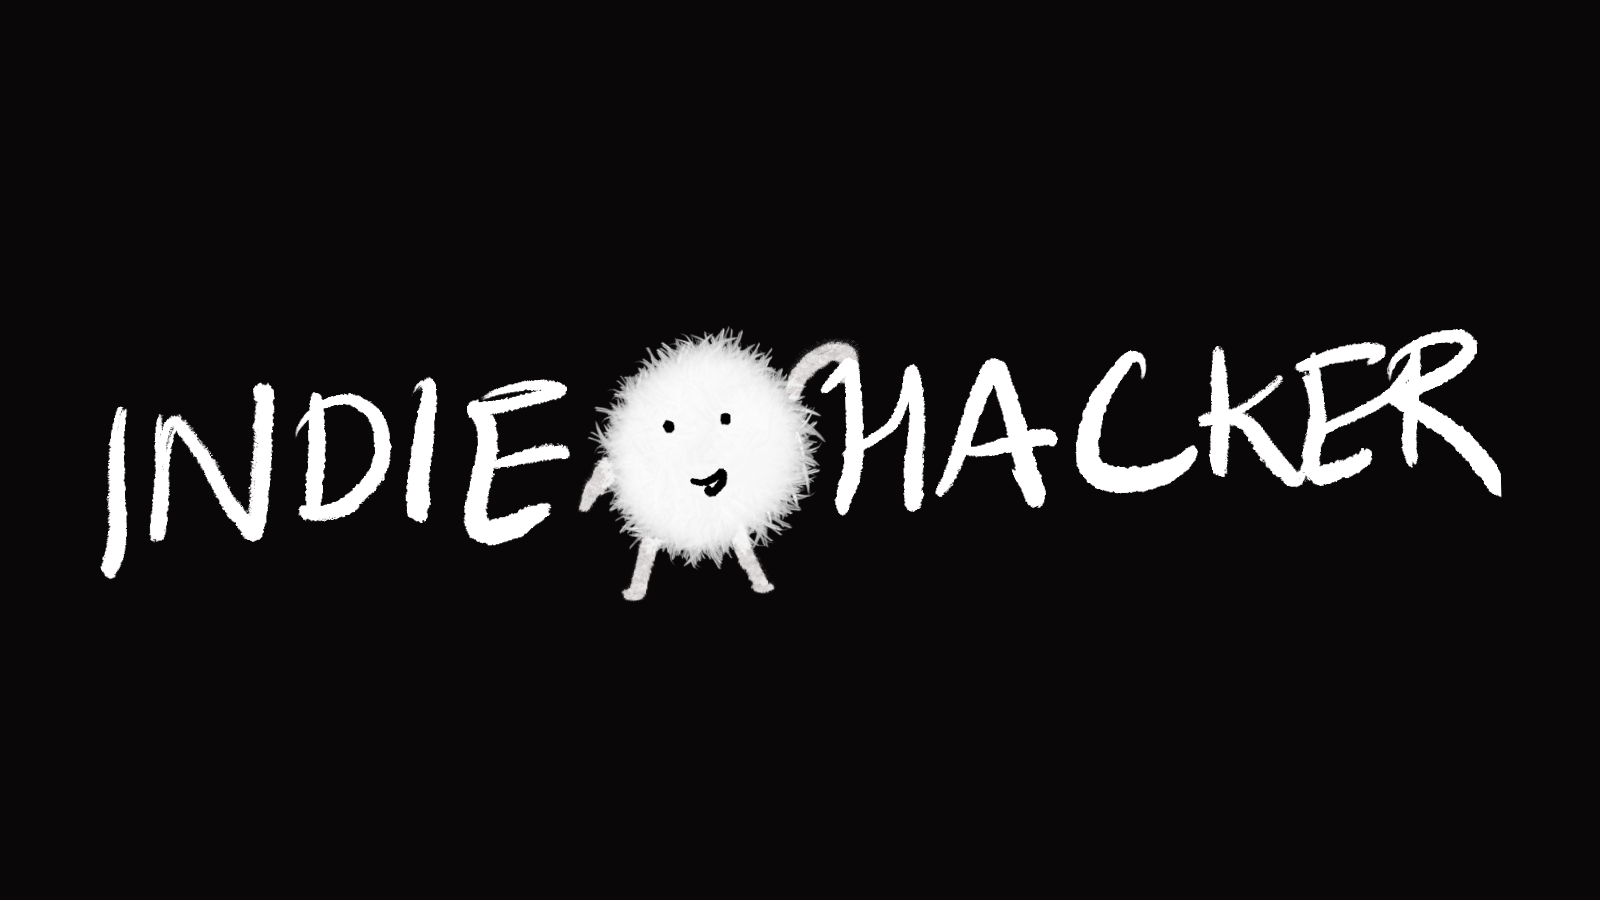 What is an Indie Hacker? (An Intro & Guide to Indie Hacking)